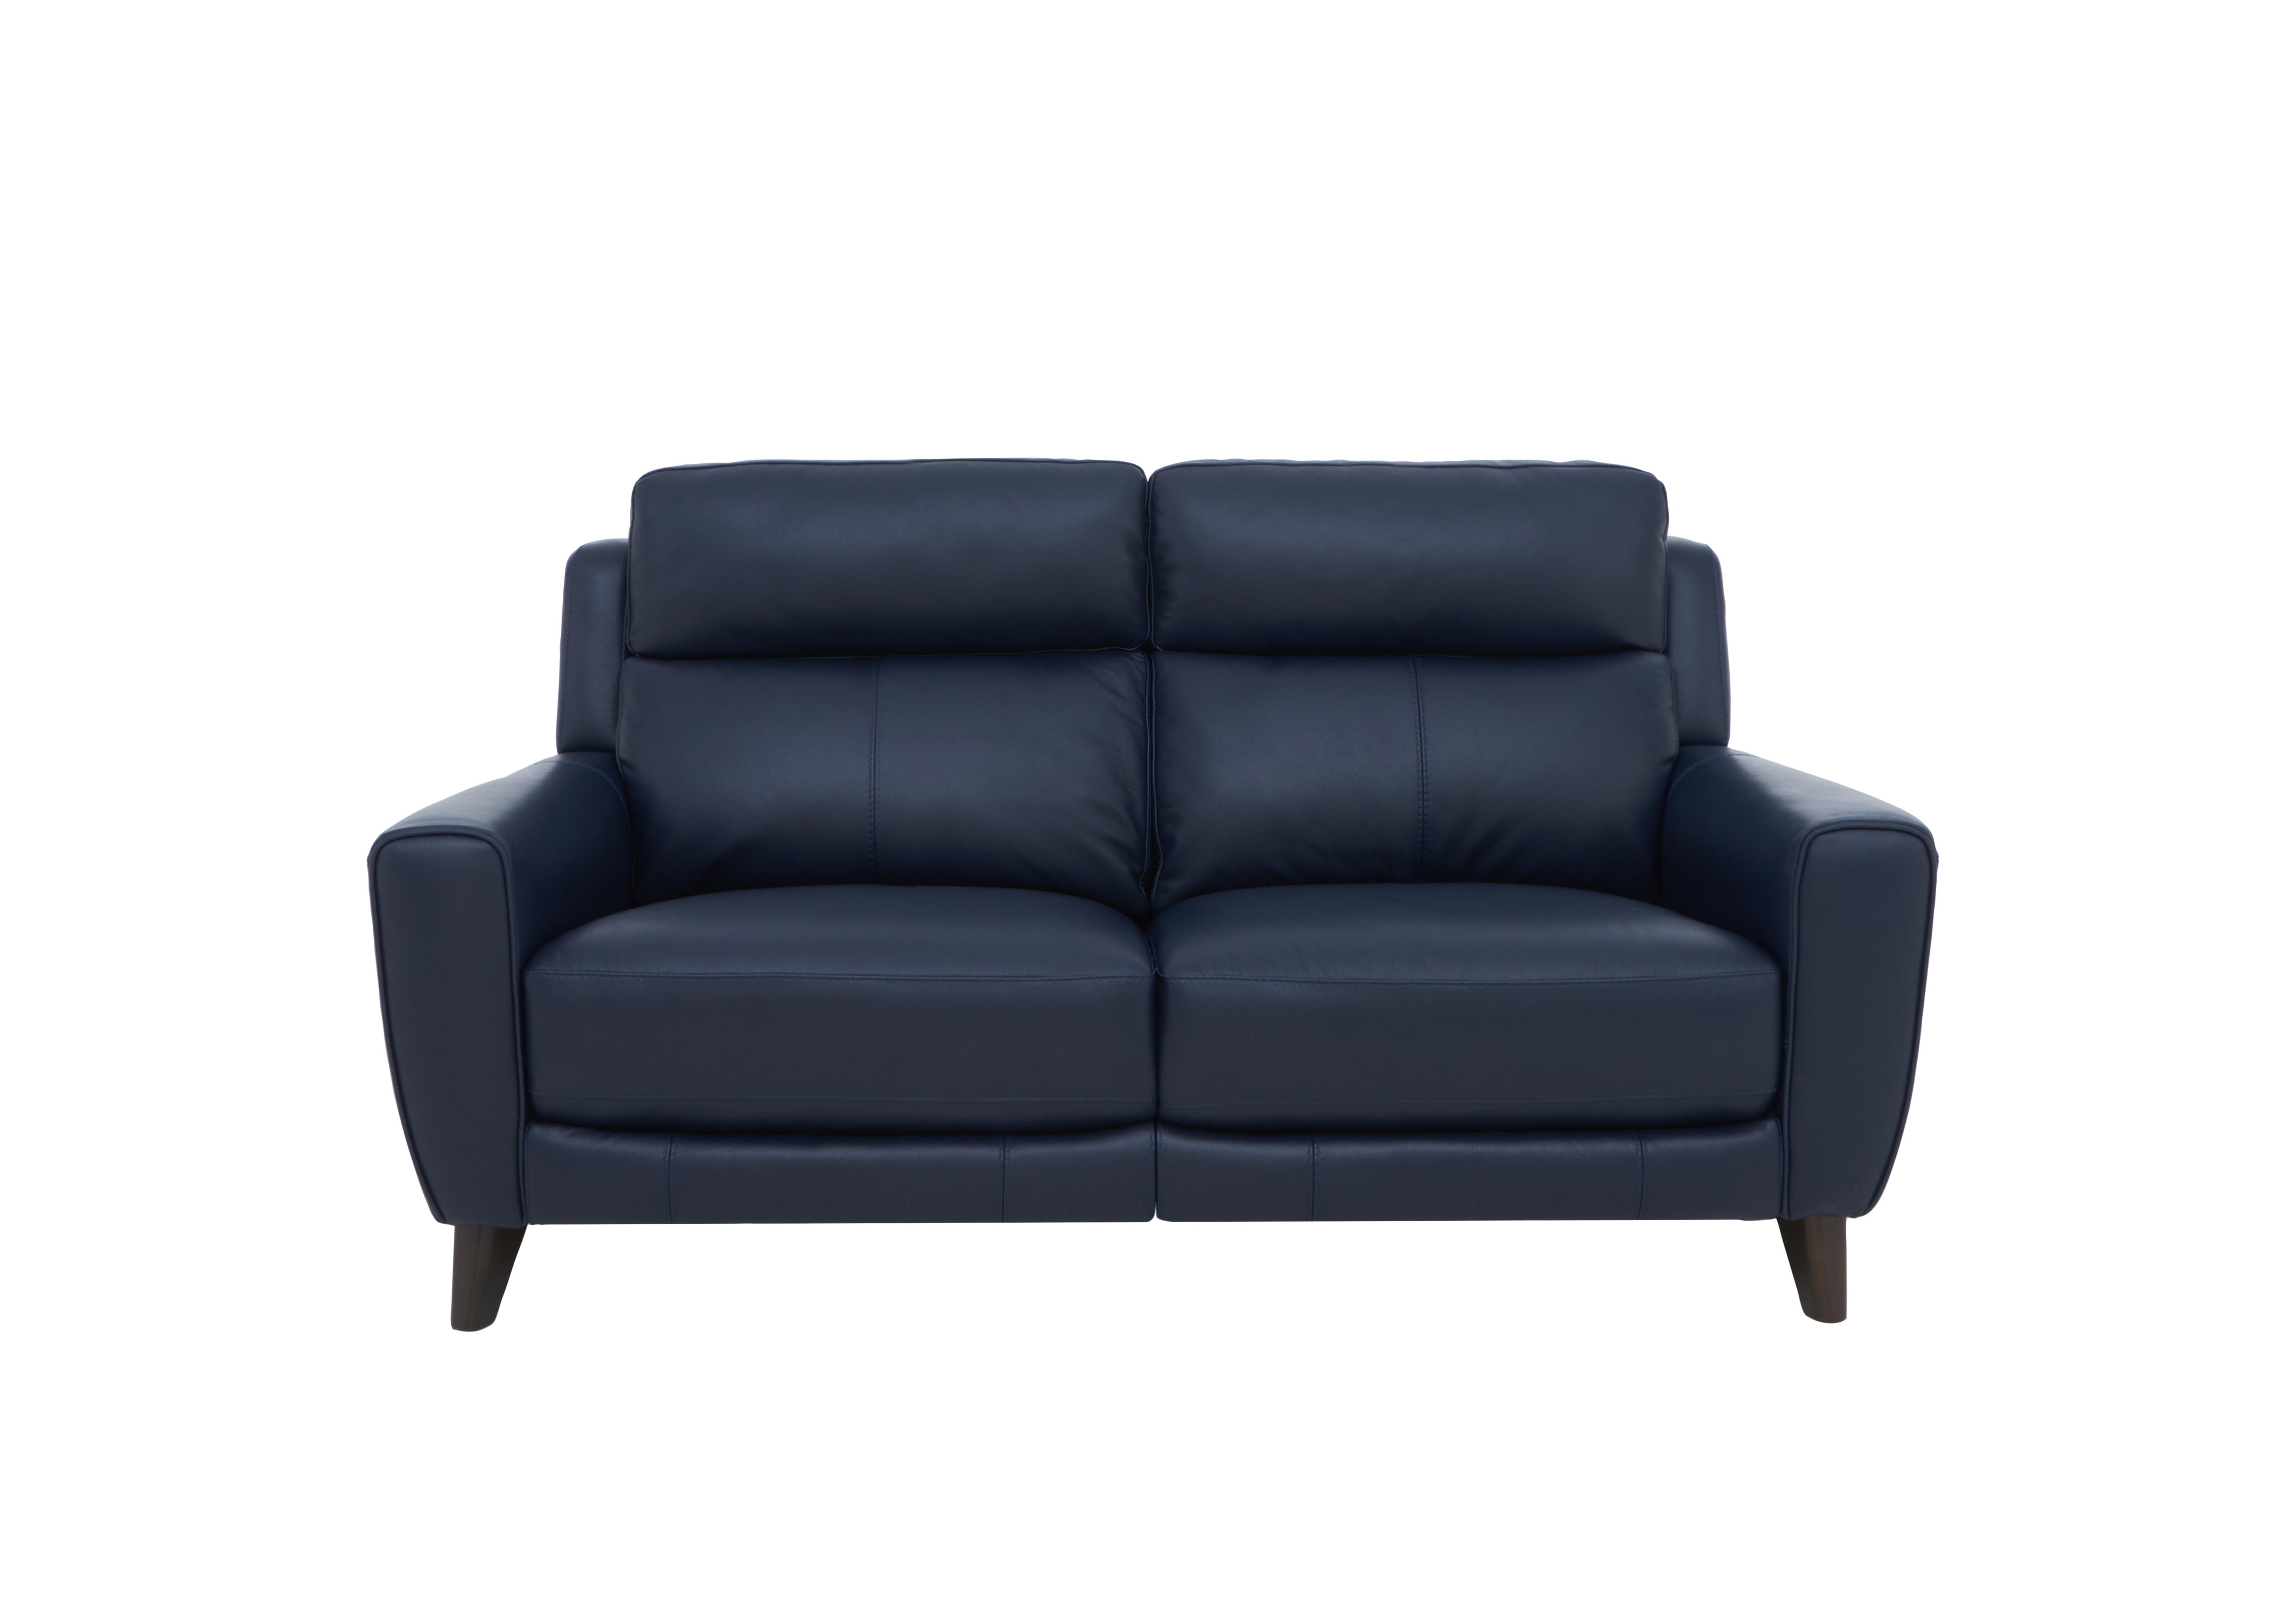 Zen 2 Seater Leather Power Recliner Sofa with Power Headrests and Power Lumbar in Bx-036c Navy on Furniture Village